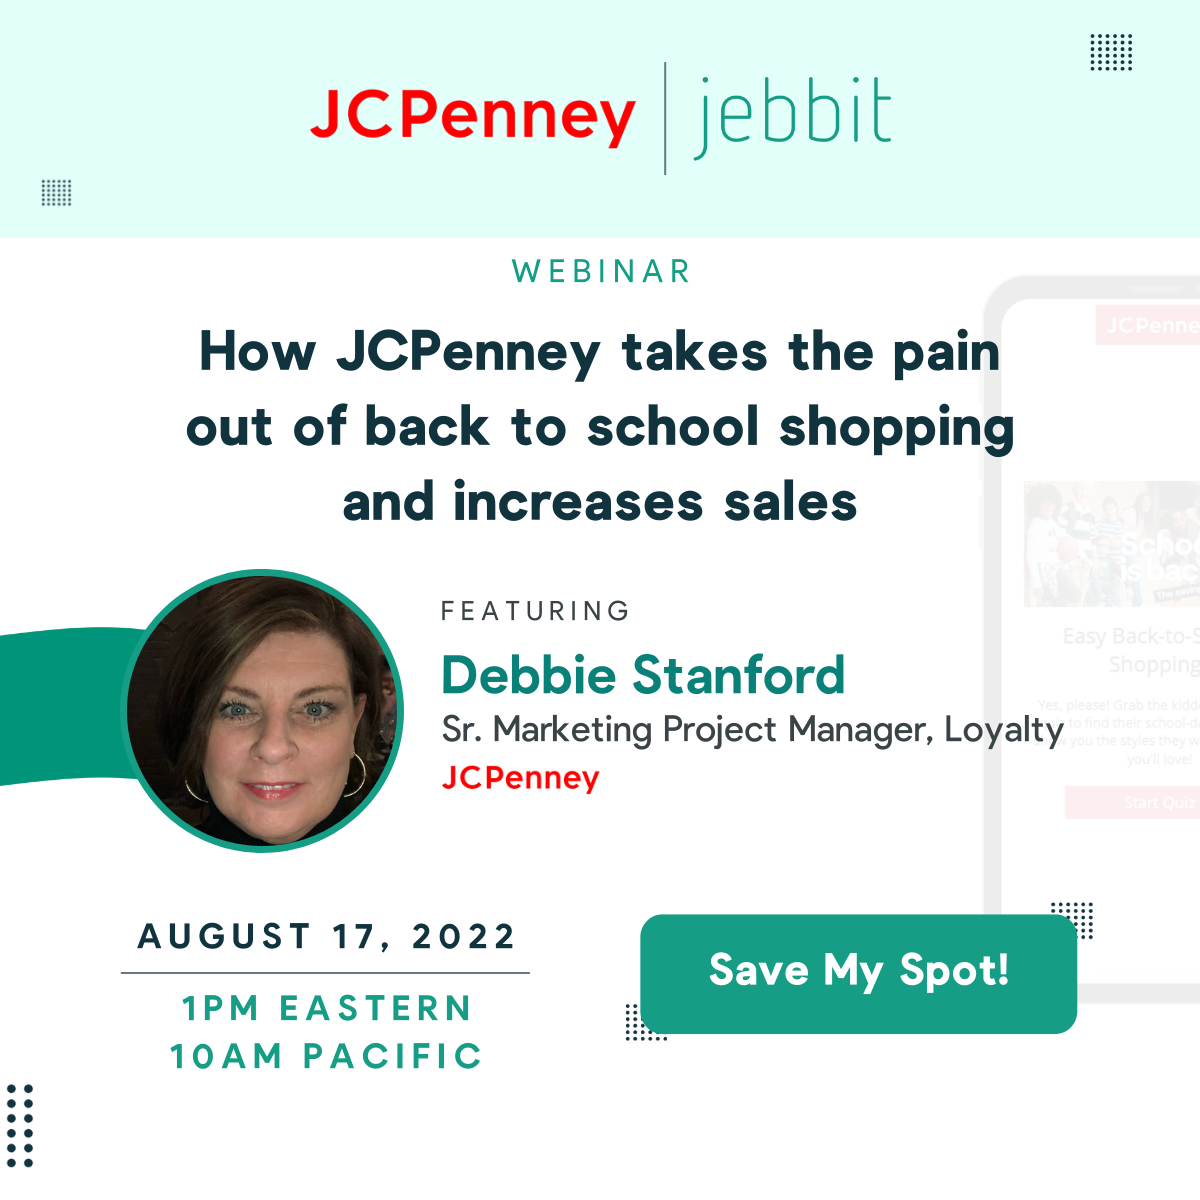 How JCPenney takes the pain out of back to school shopping and increases sales